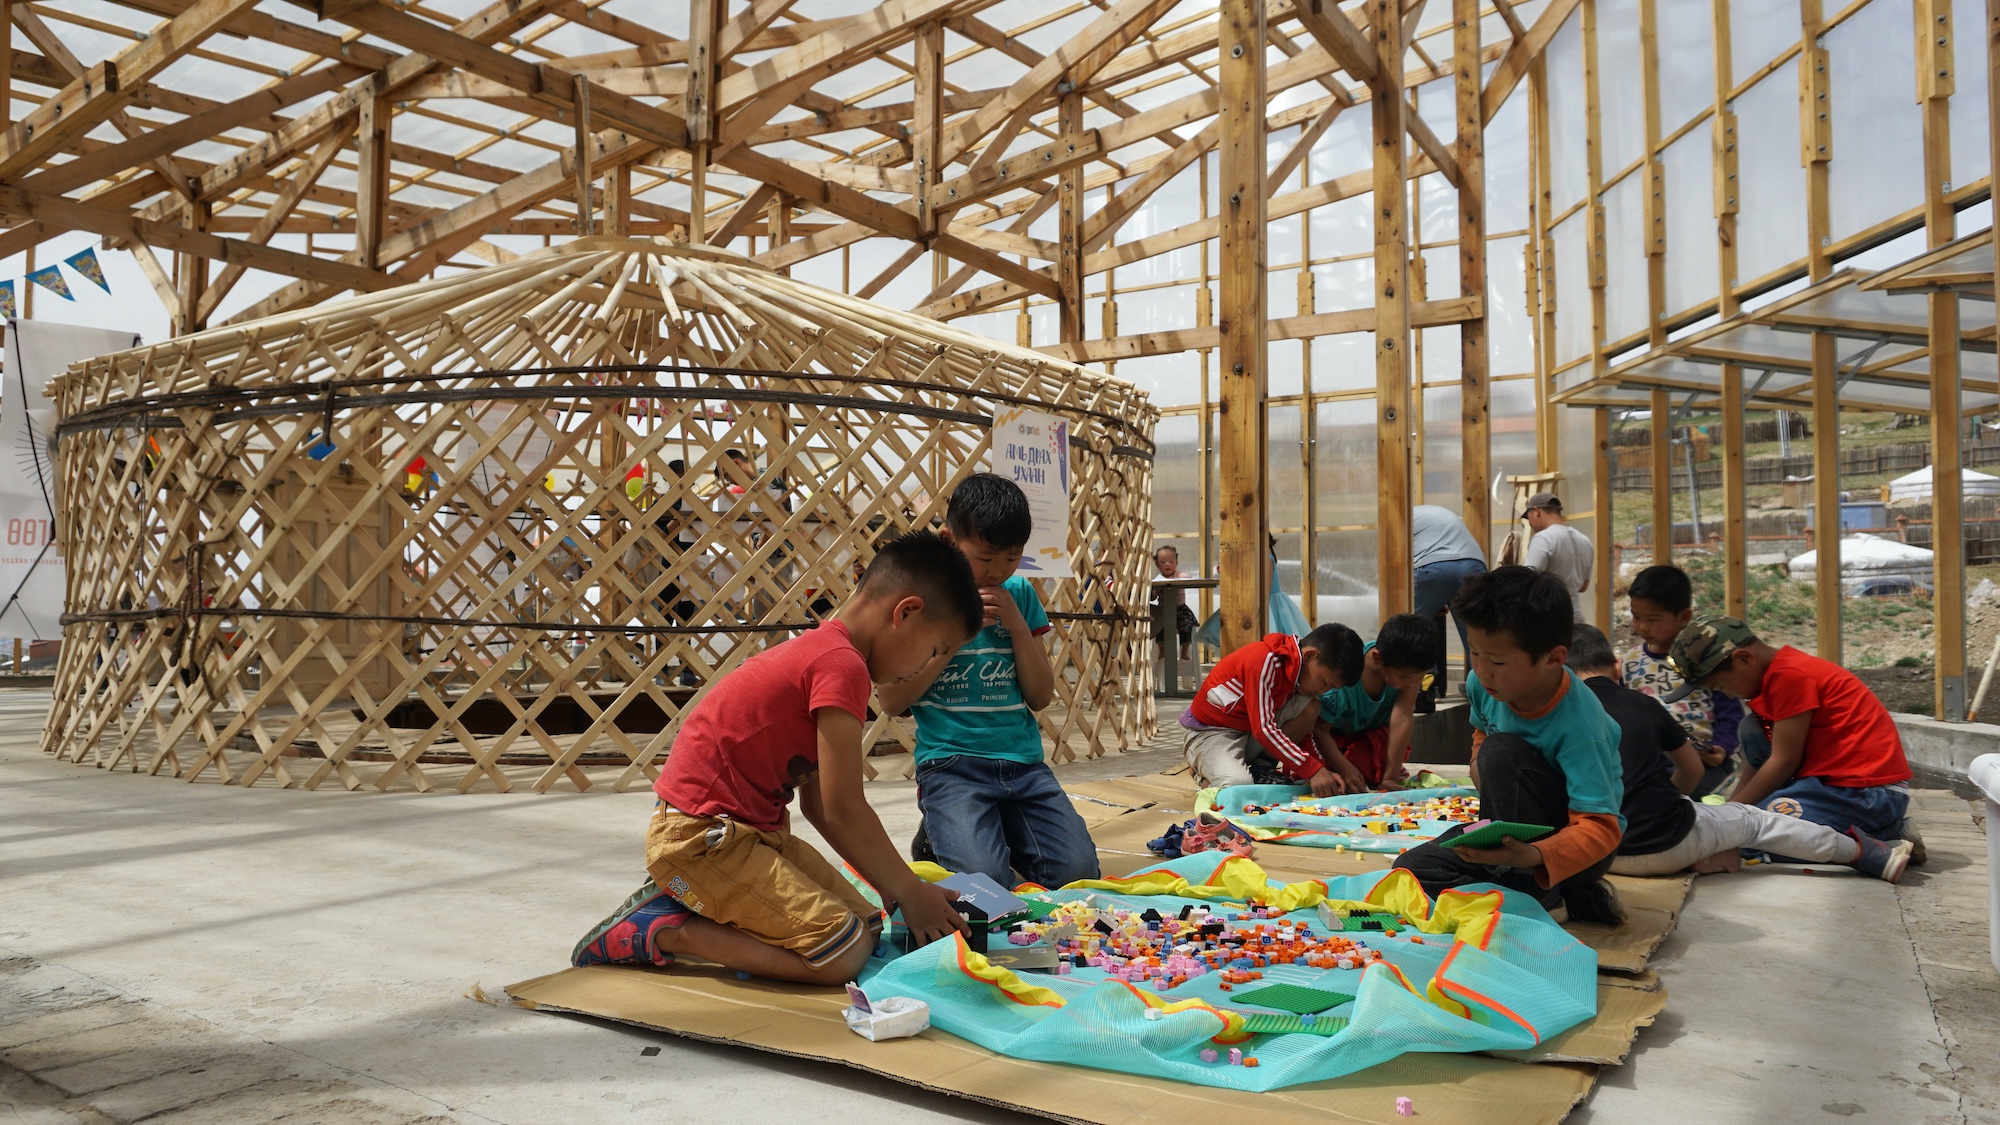 A group of children sit on the floor of a wood-framed and glass-clad structure. The children are interacting with colorful materials.